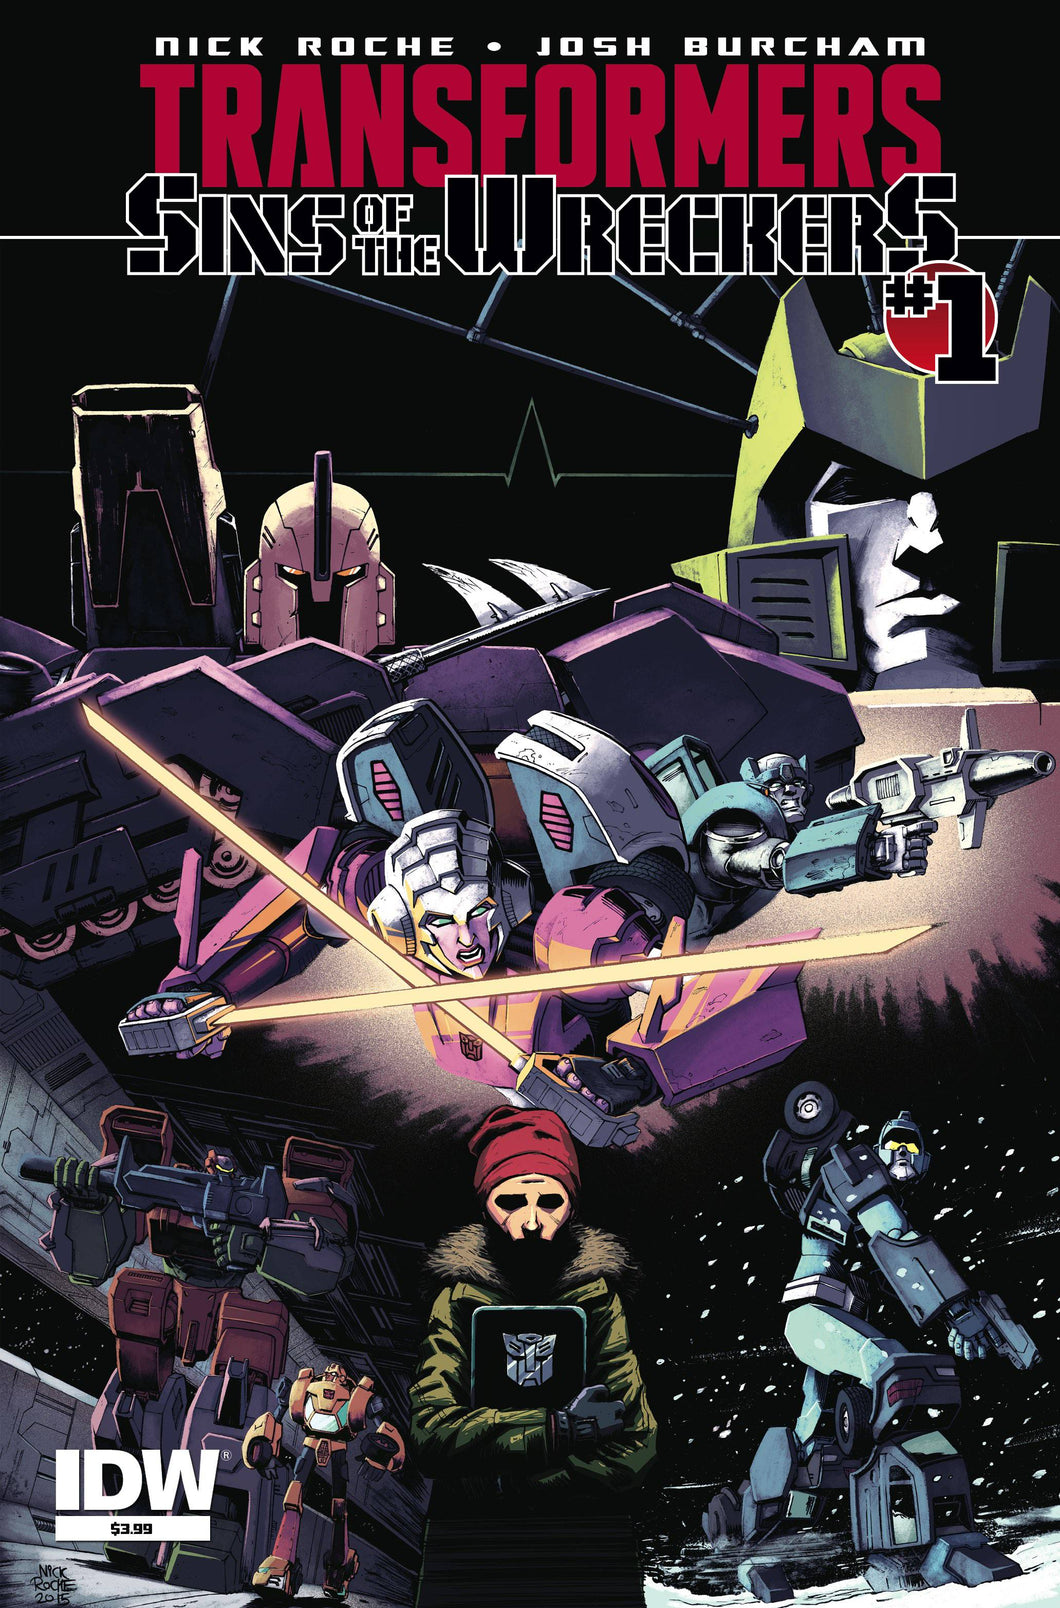 TRANSFORMERS: SINS O/T WRECKERS #1-5 (IDW 2015) COMPLETE SET